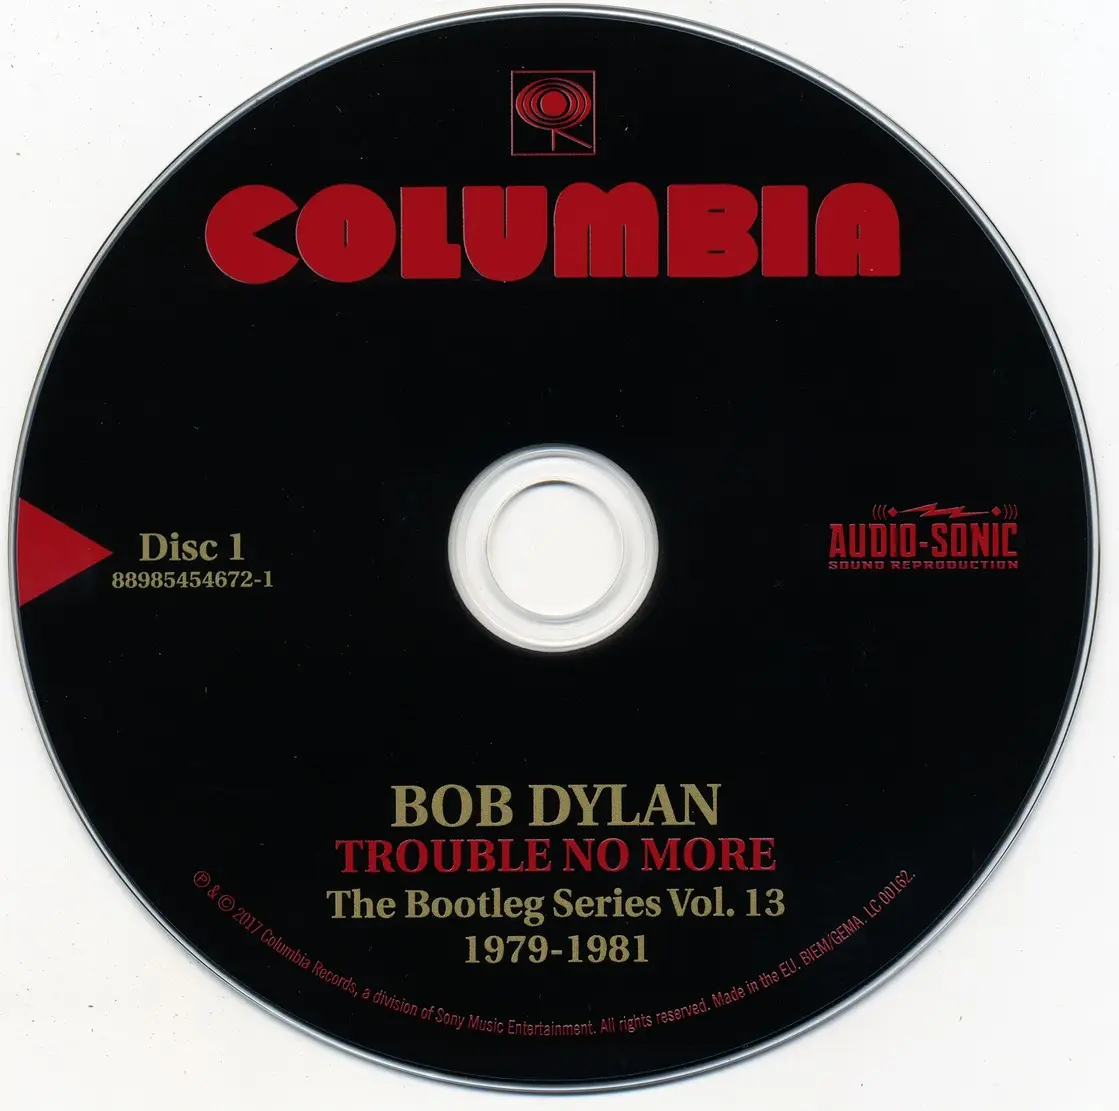 Bob Dylan Trouble No More The Bootleg Series Vol 13 1979 1981